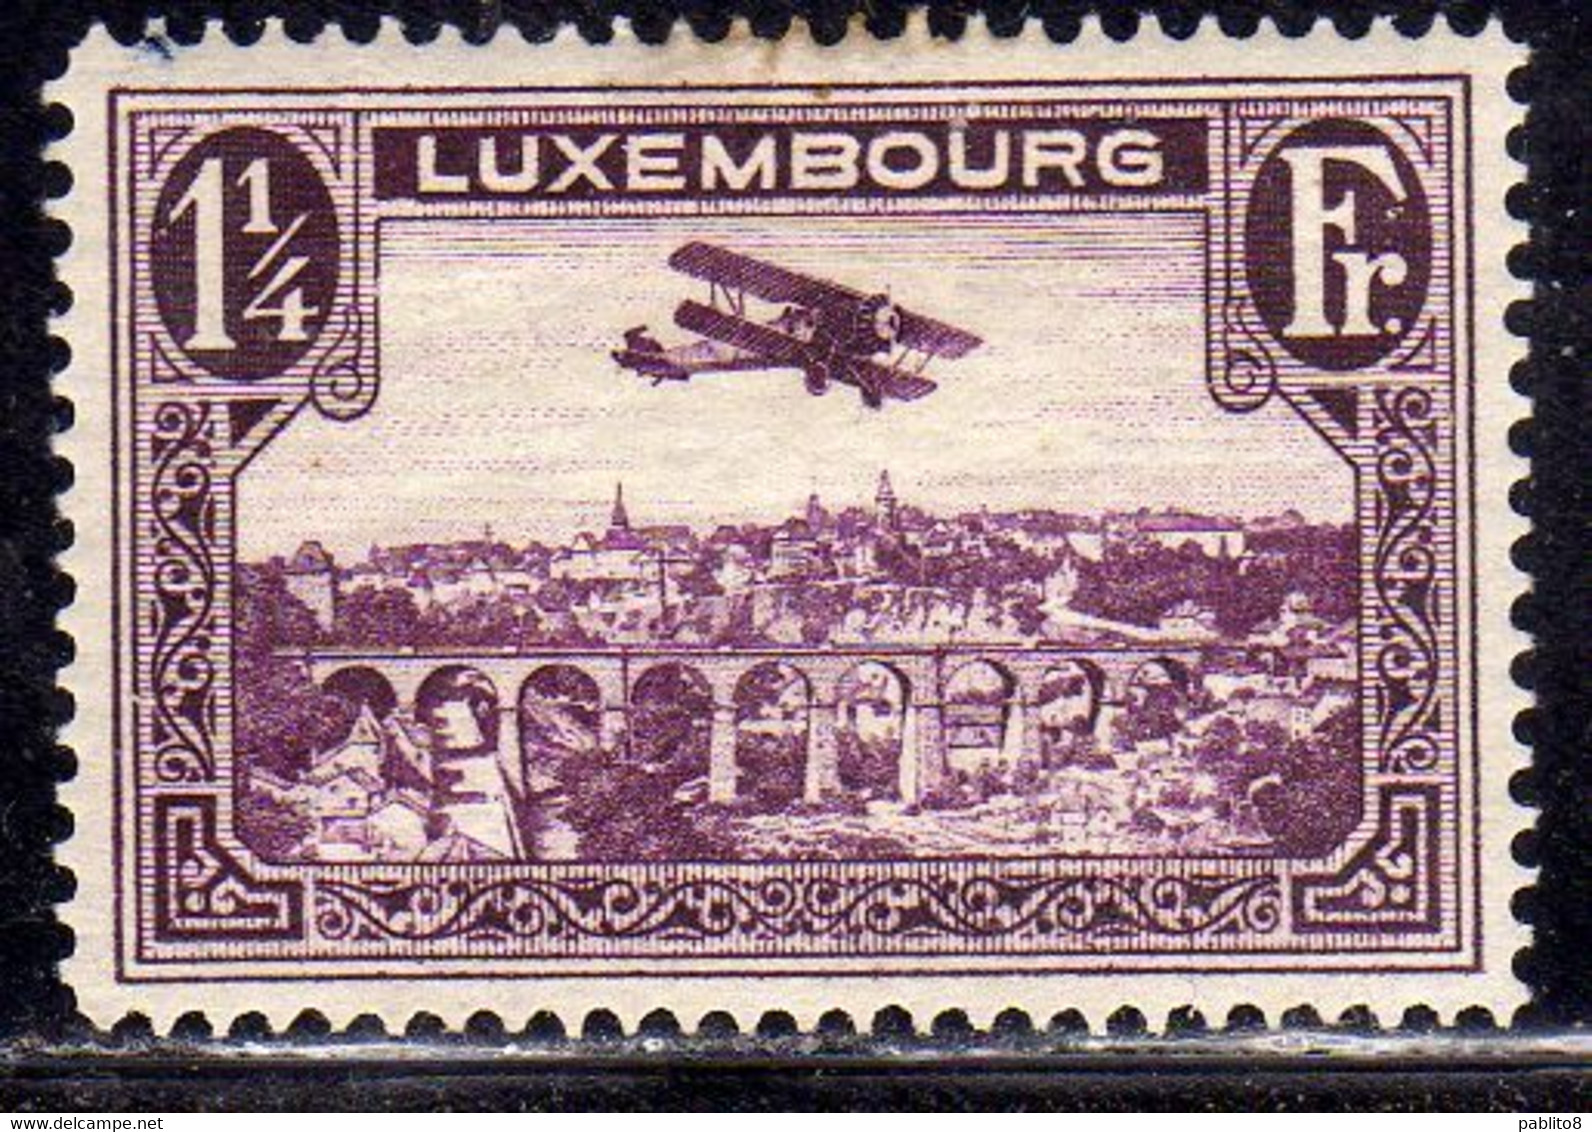 LUXEMBOURG LUSSEMBURGO 1931 1933 AIR POST STAMPS AIRMAIL AIRPLANE OVER POSTA AEREA 1 1/4fr MLH - Unused Stamps